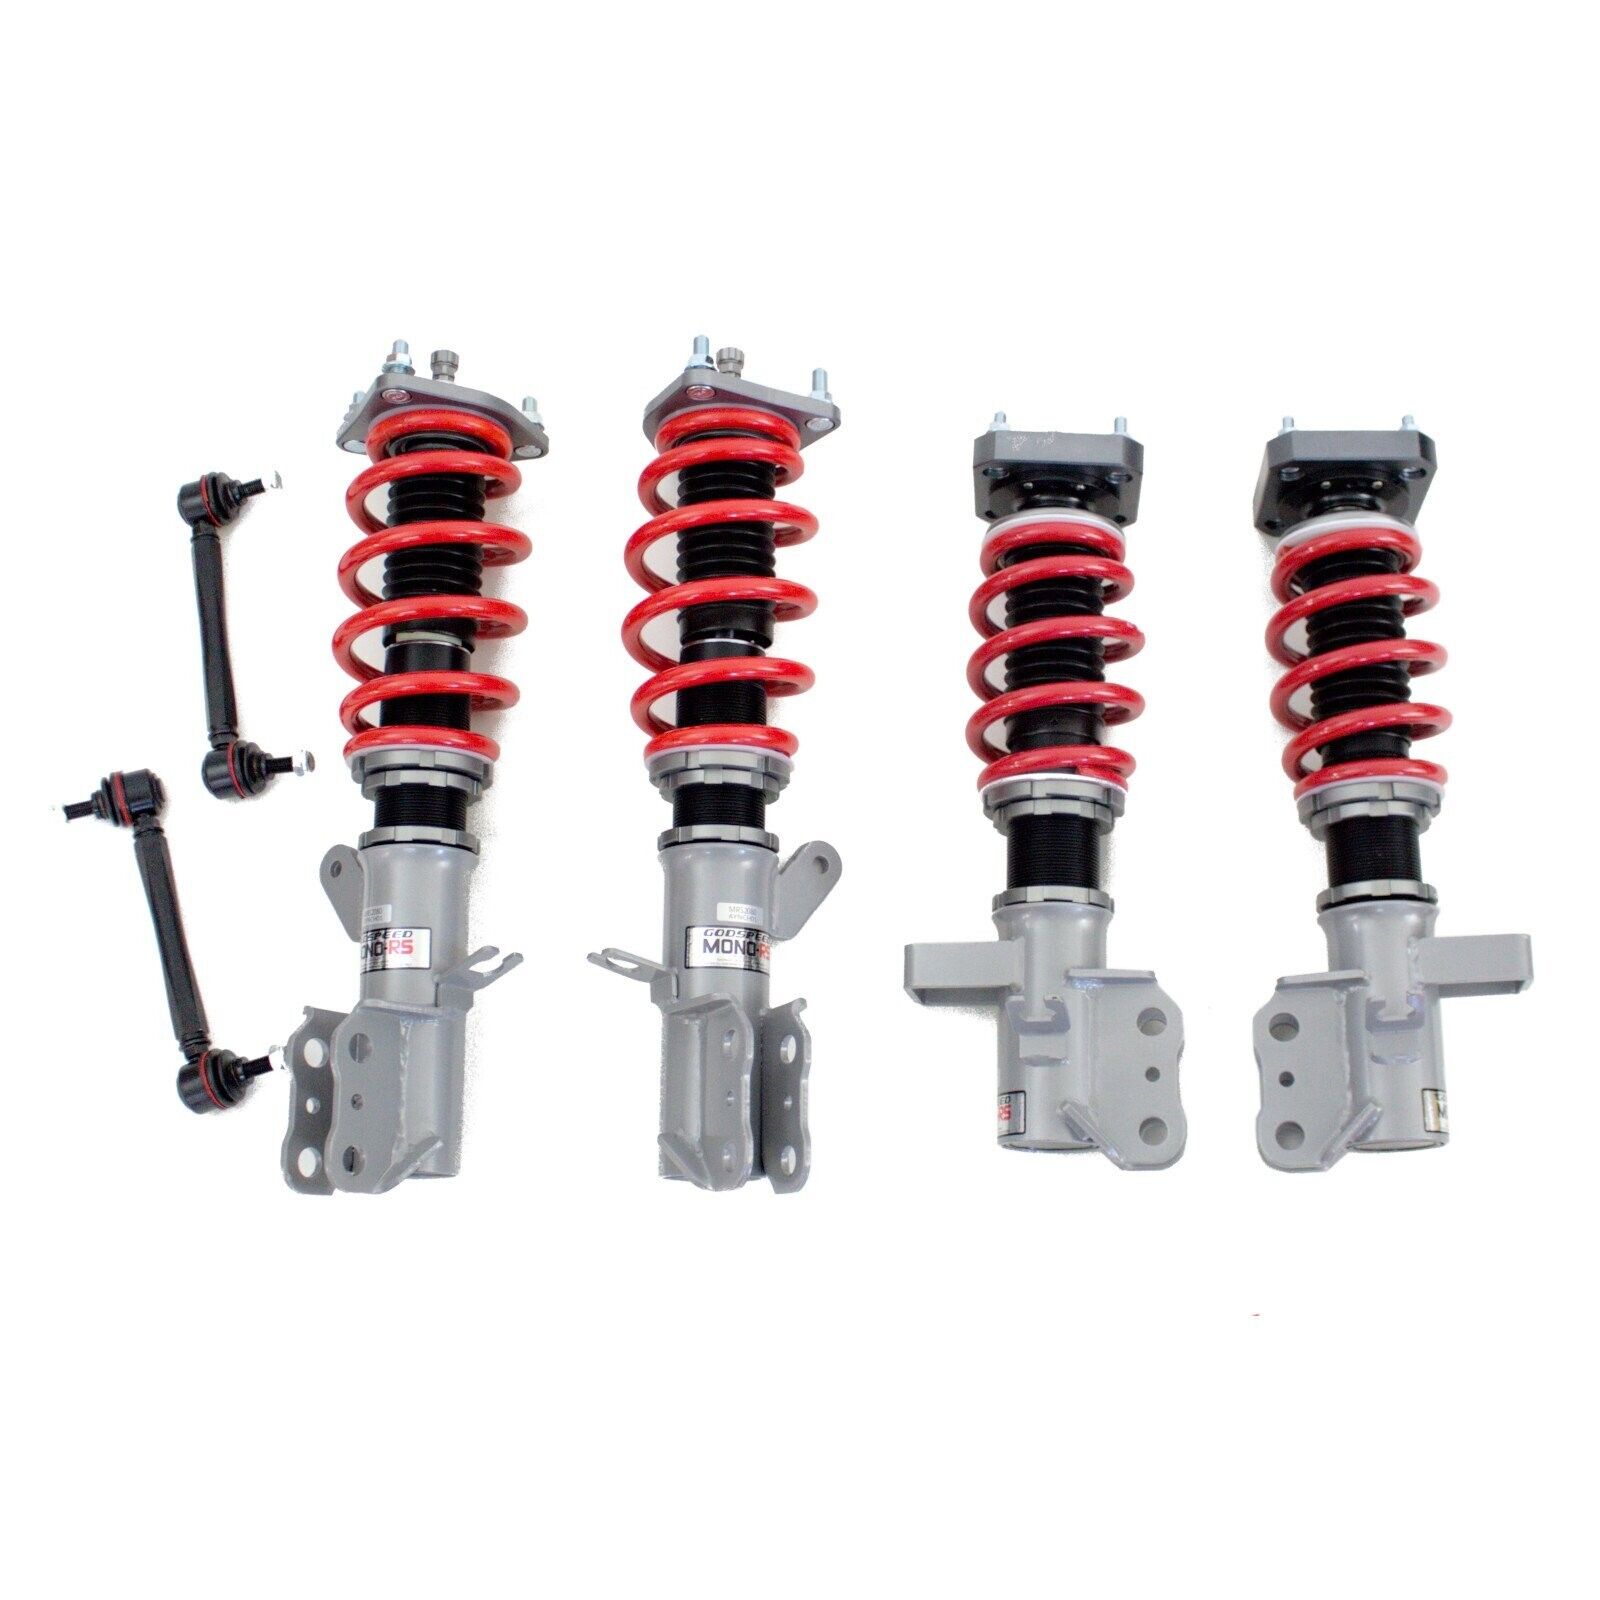 GSP Godspeed Mono RS Coilovers Suspension Kit for Toyota MR2 SW20 SW21 91-95 New